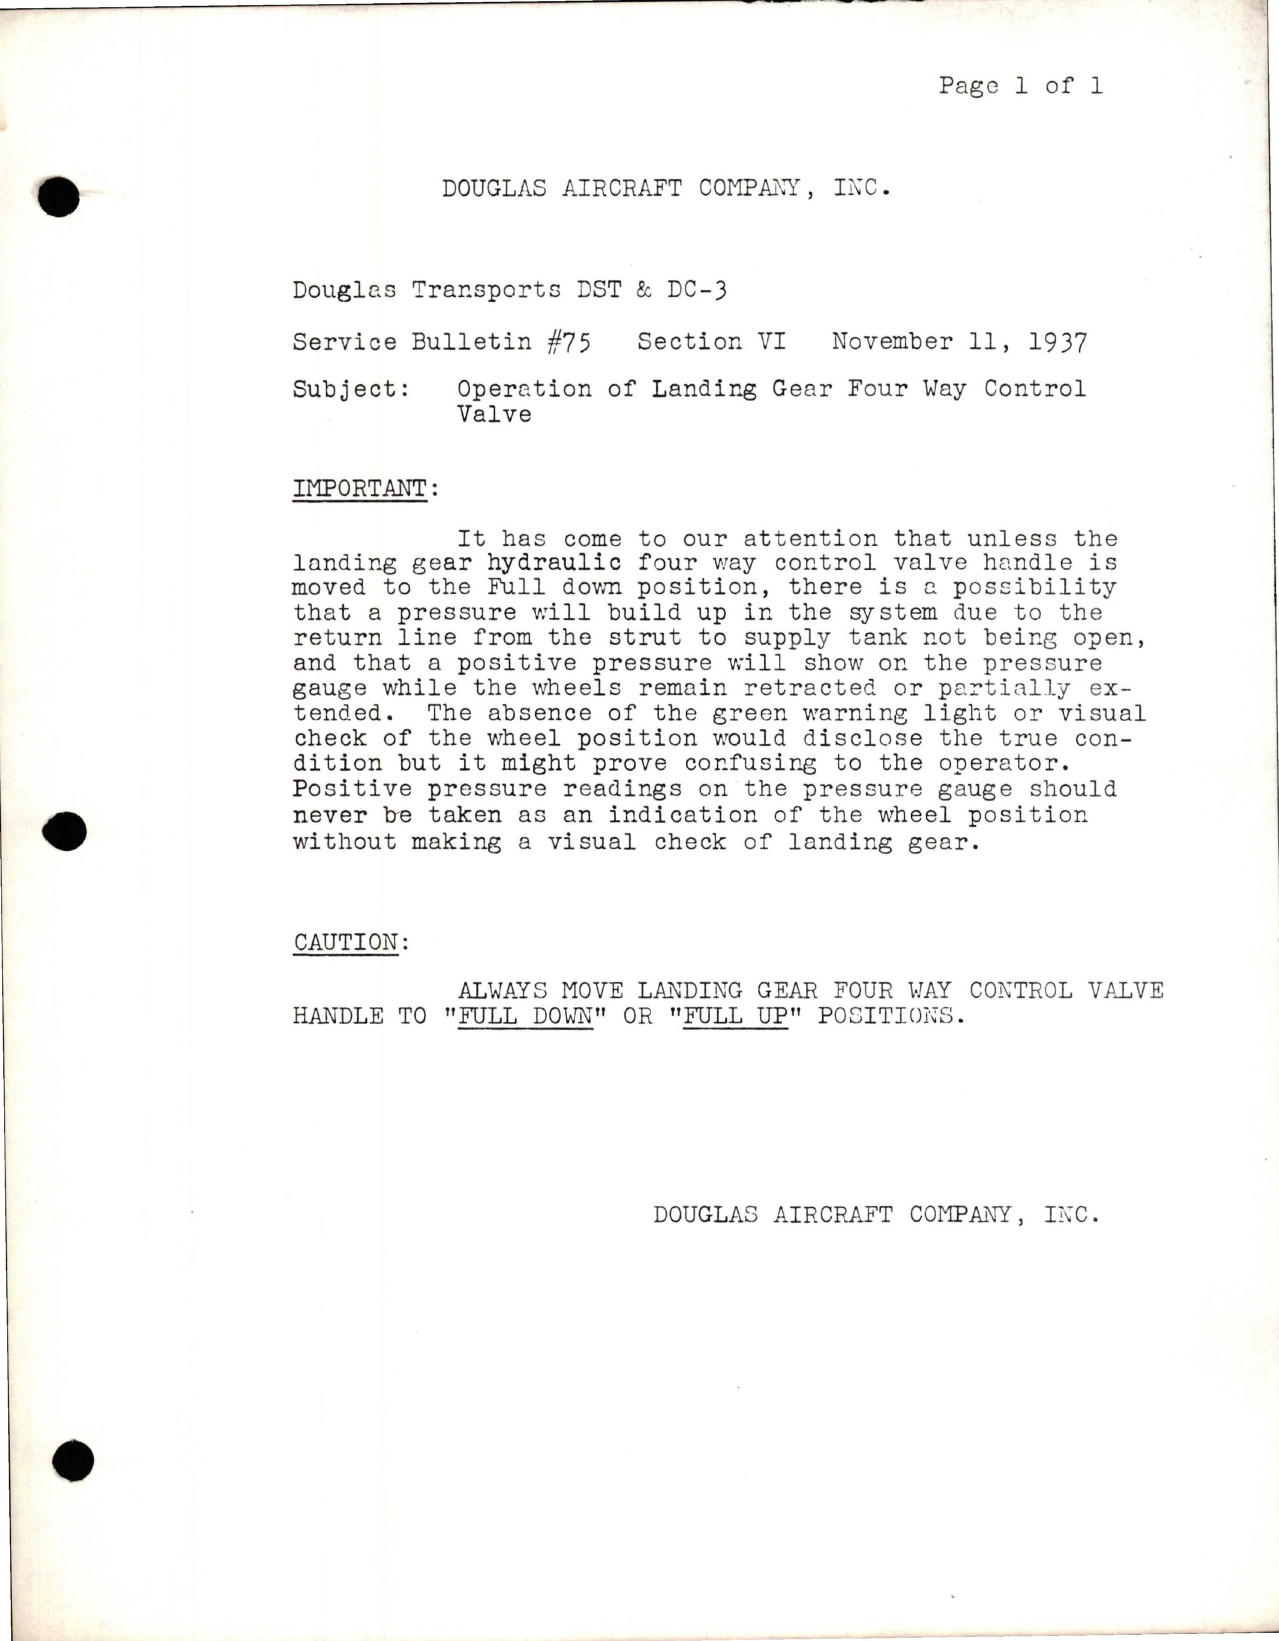 Sample page 1 from AirCorps Library document: Operation of Landing Gear Four Way Control Valve